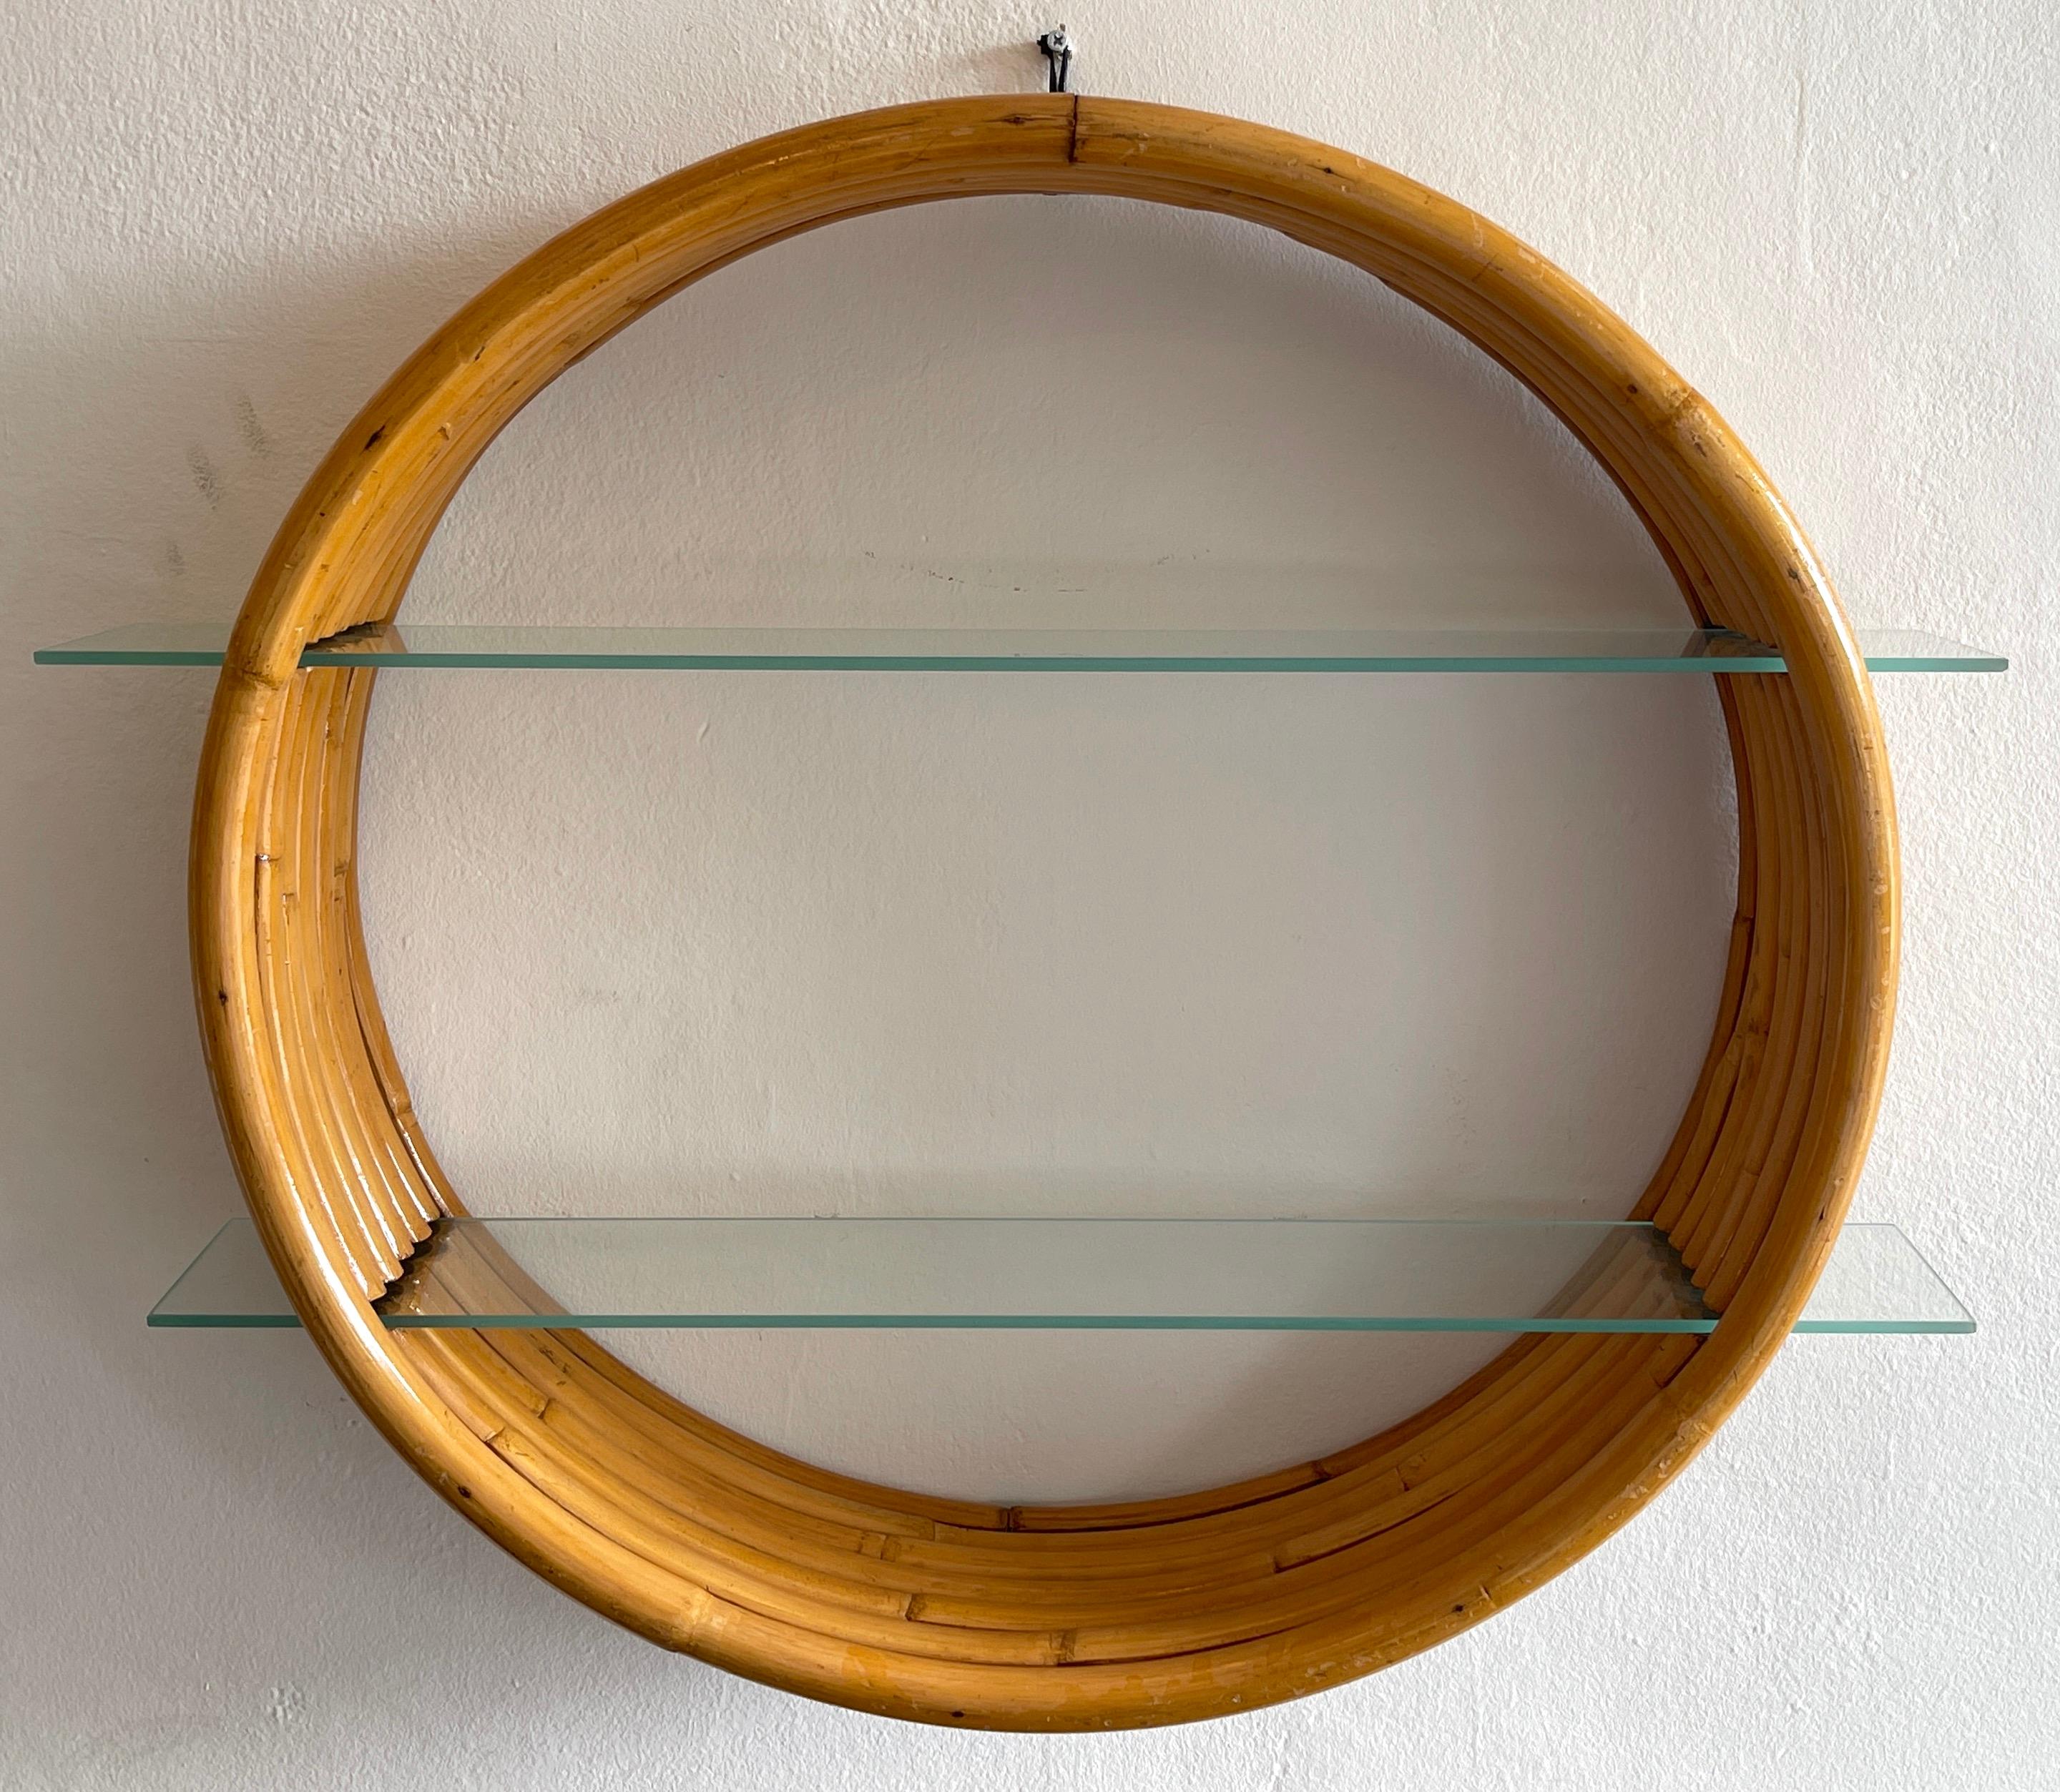 Porthole bamboo wall shelf, by Paul Frankl 
The circular frame with seven strands of thick bamboo, fitted with two interchangeable glass shelves
Measures: 30